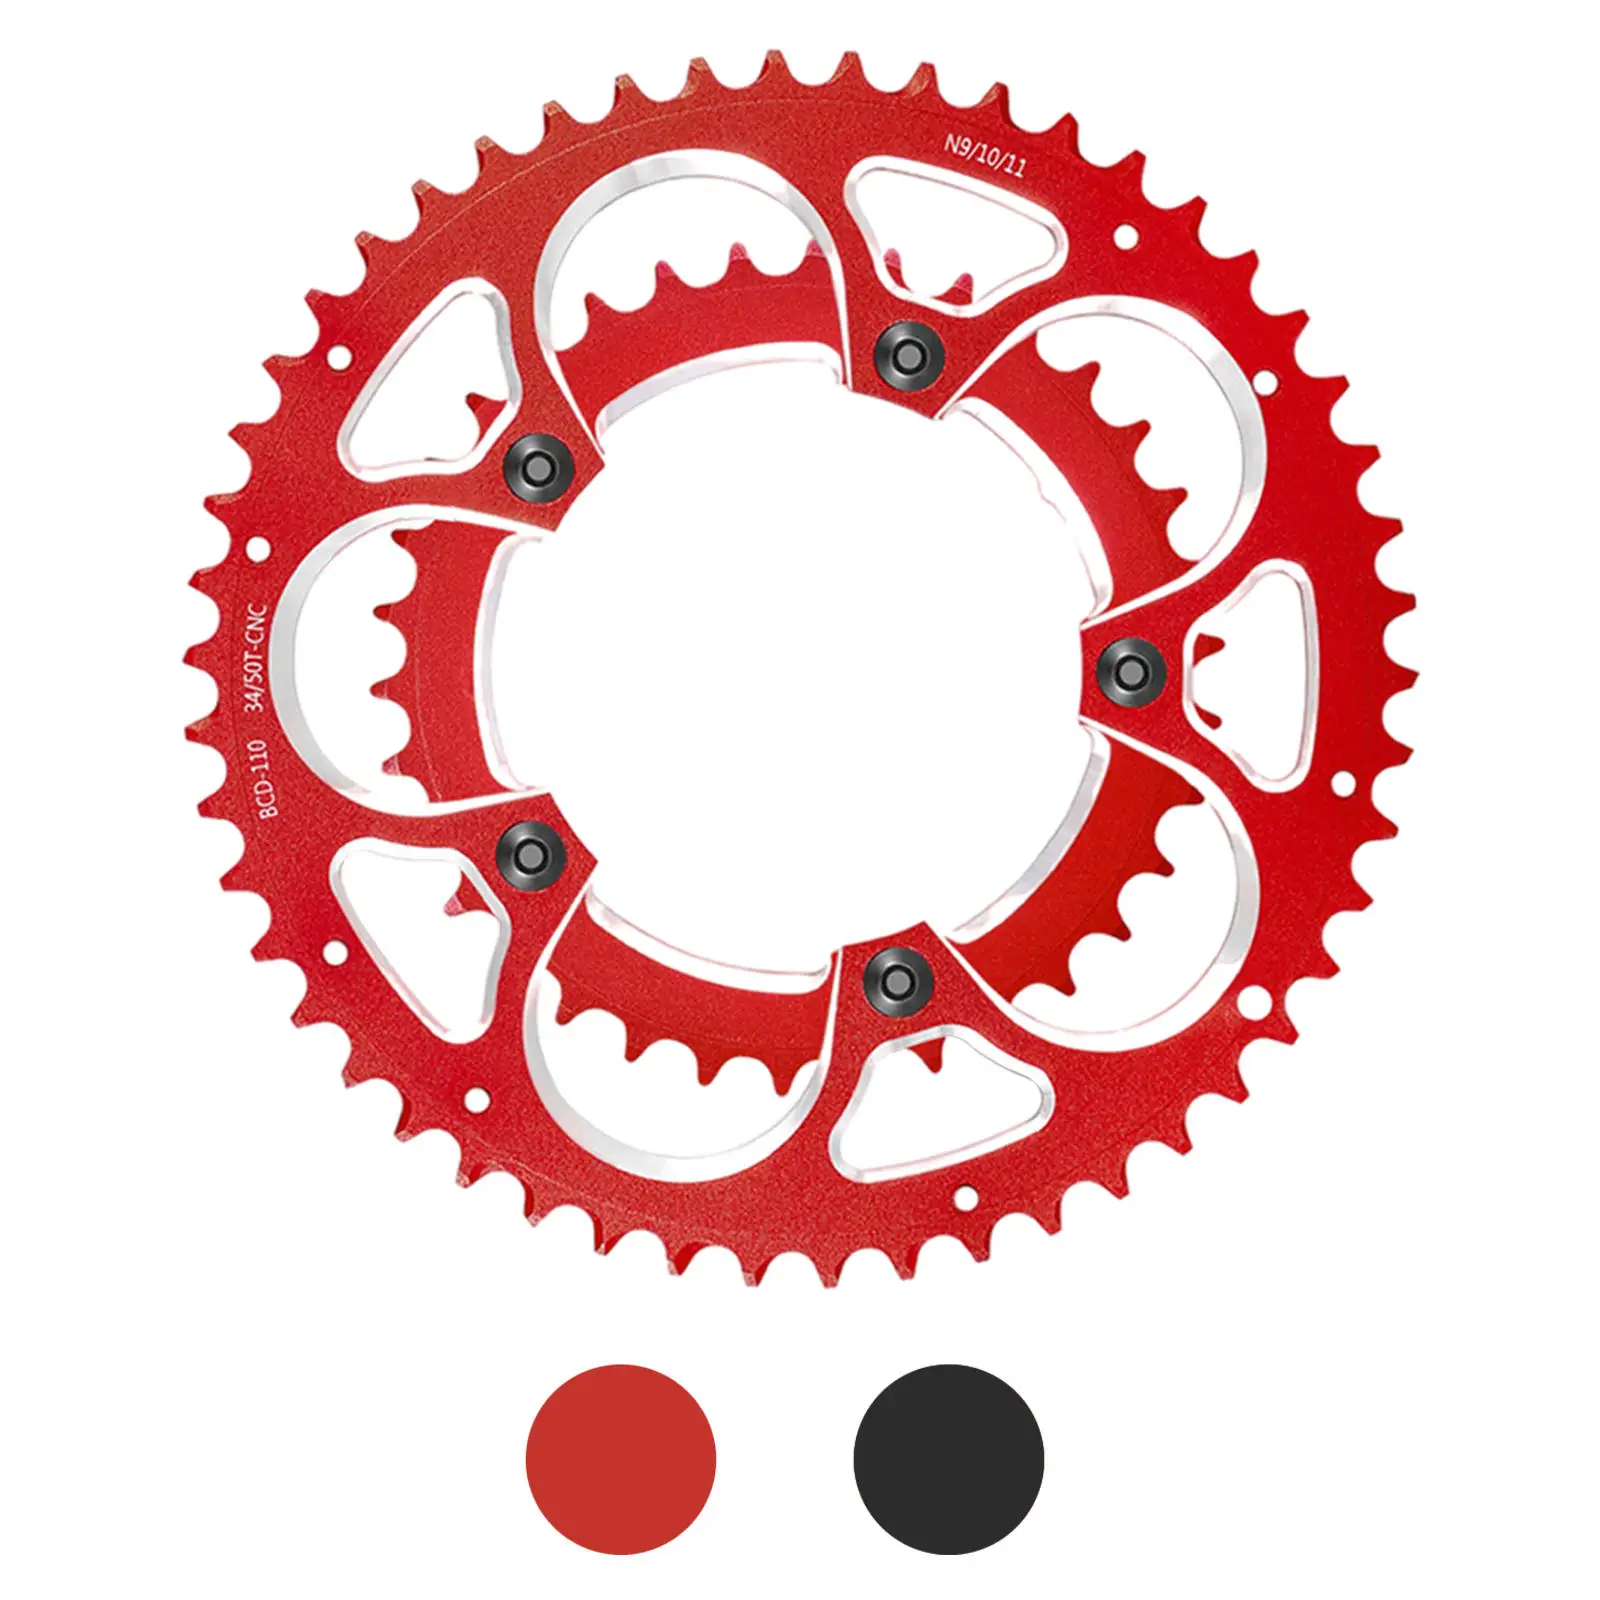 Chainring for Road Bike 130mm BCD Aluminum Alloy CNC Machined 39T 53T for 8 to 11 Speed Chains